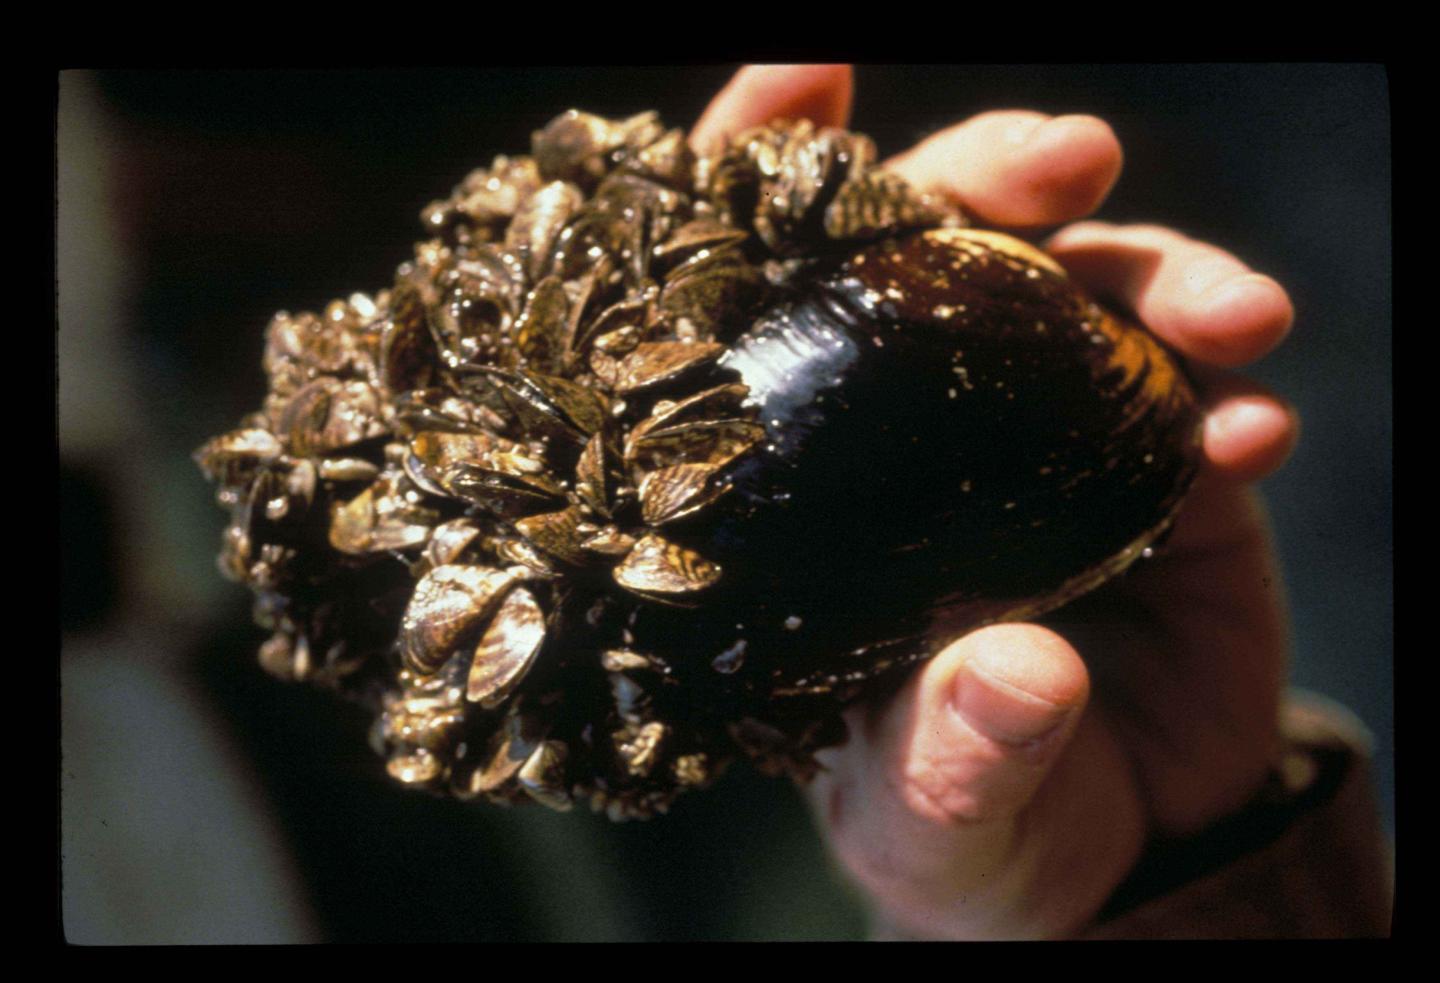 Many small zebra mussels growing on side of a native mussel species in the US